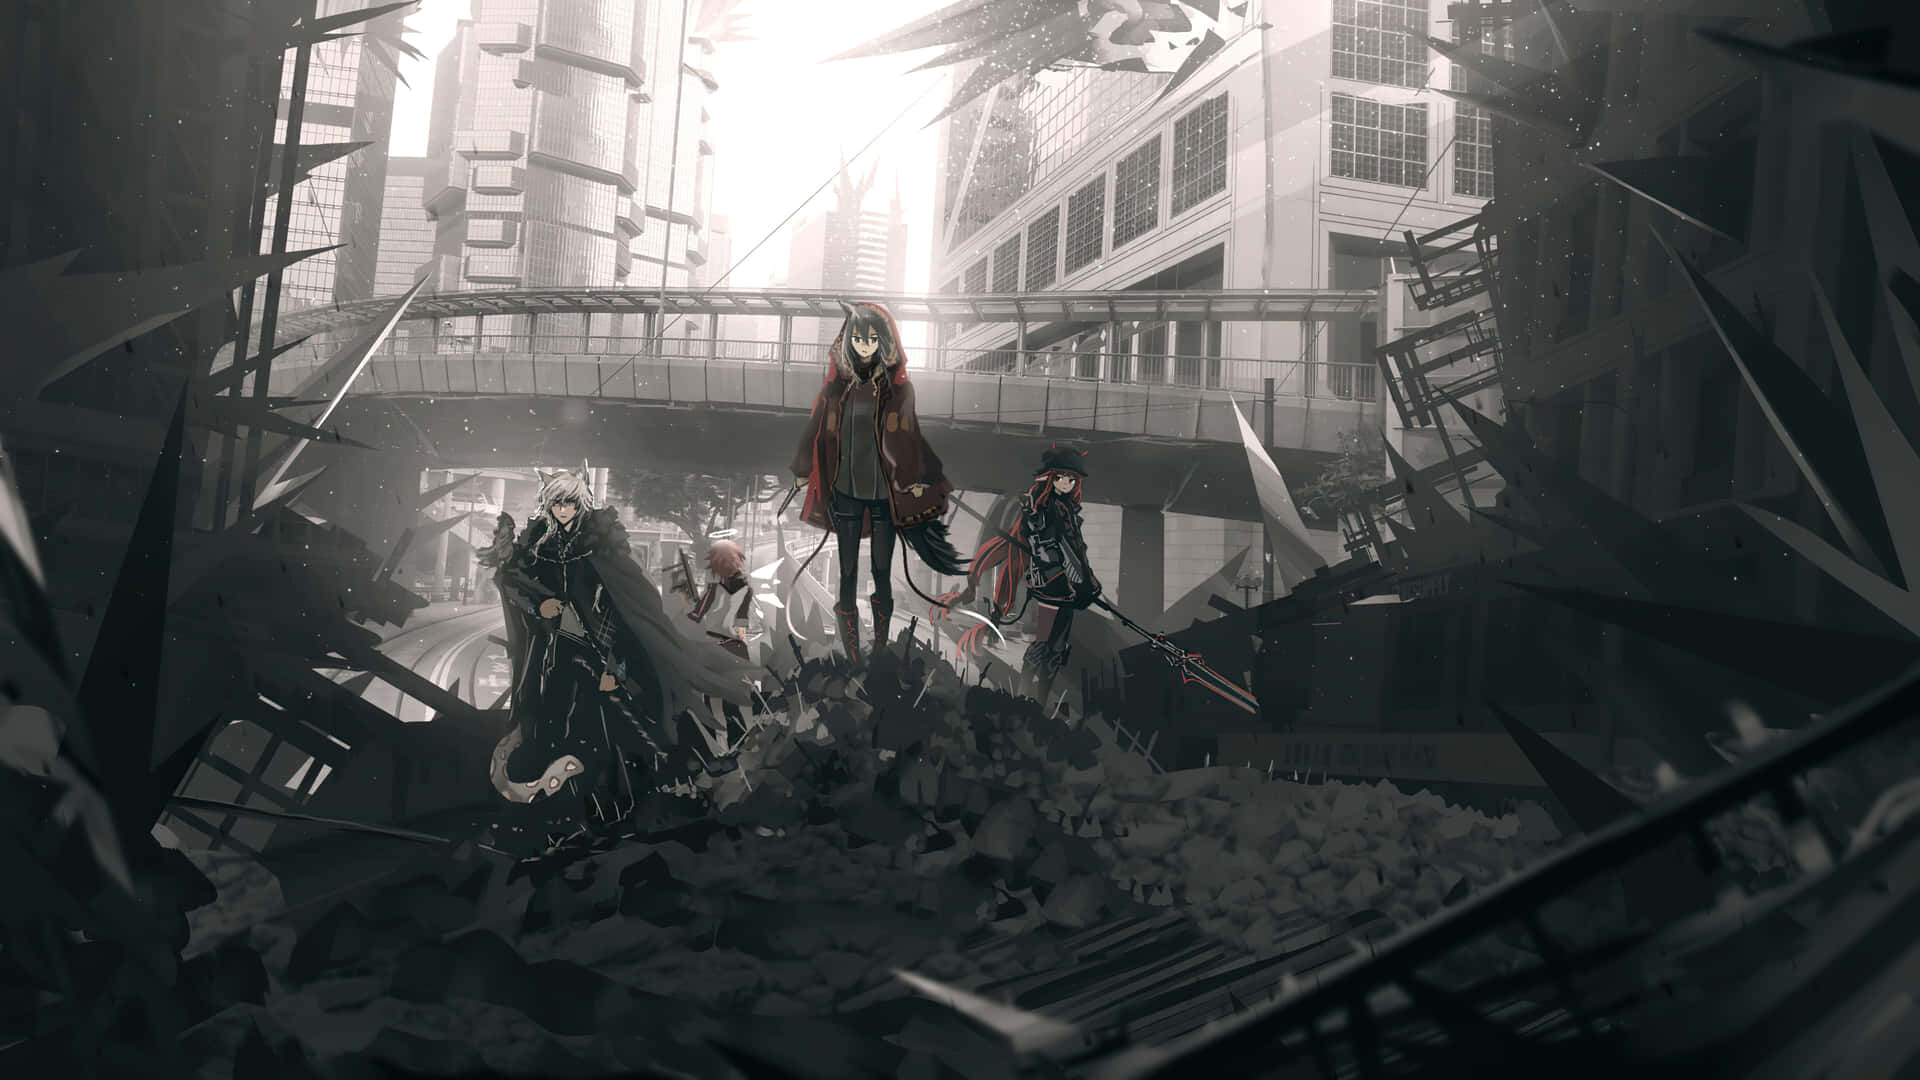 A Group Of People Standing In A City With A Lot Of Debris Wallpaper